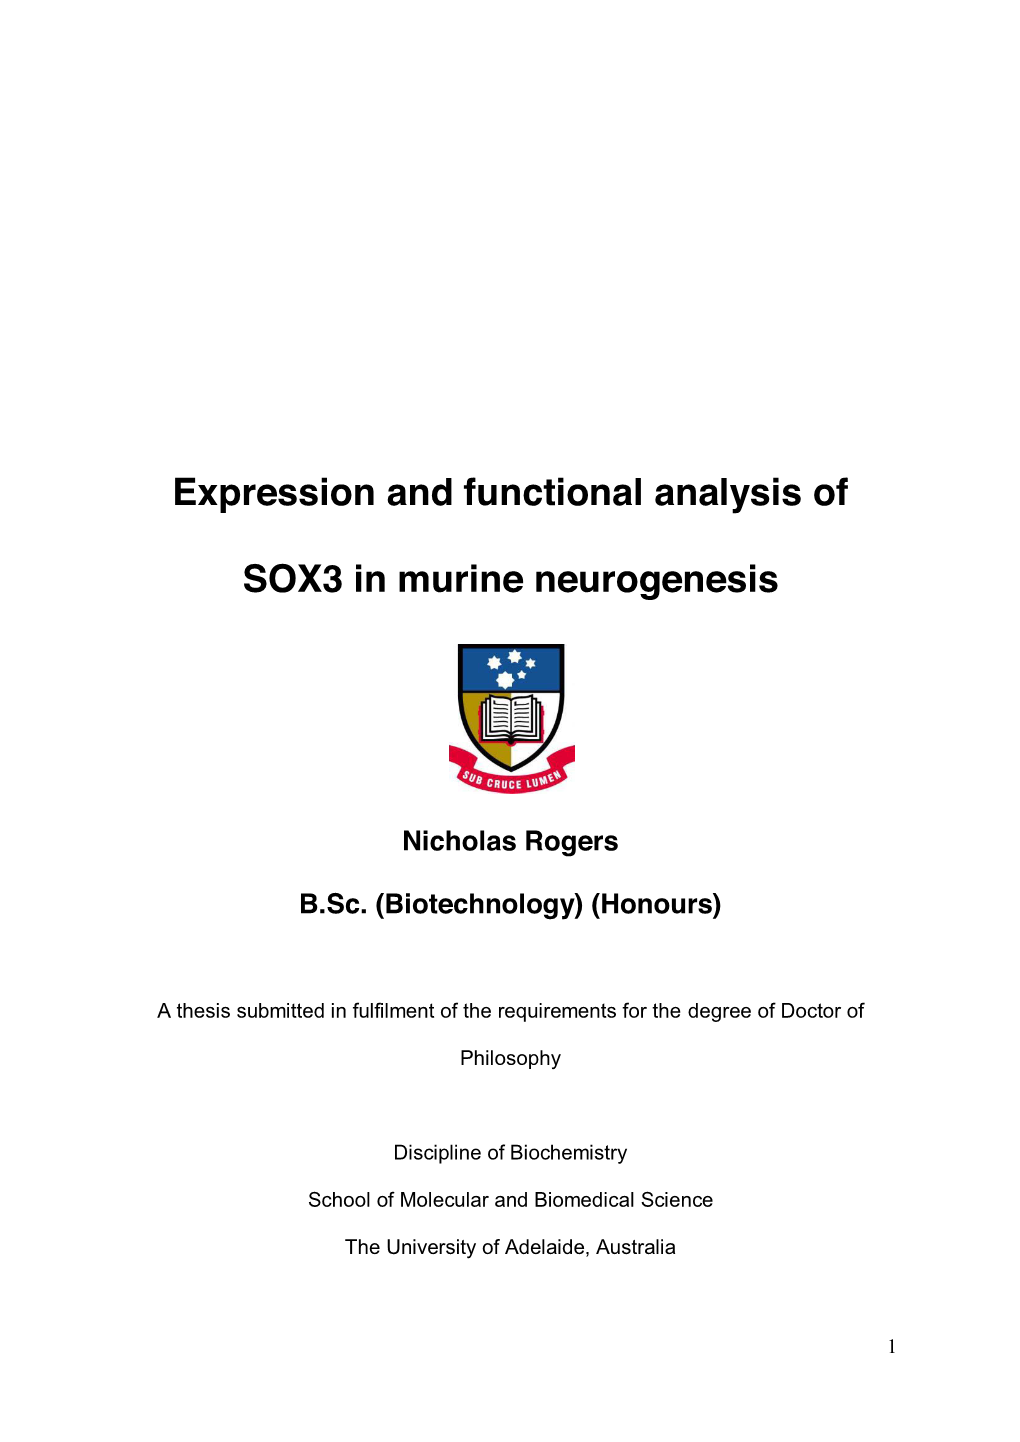 Expression and Functional Analysis of SOX3 in Murine Neurogenesis